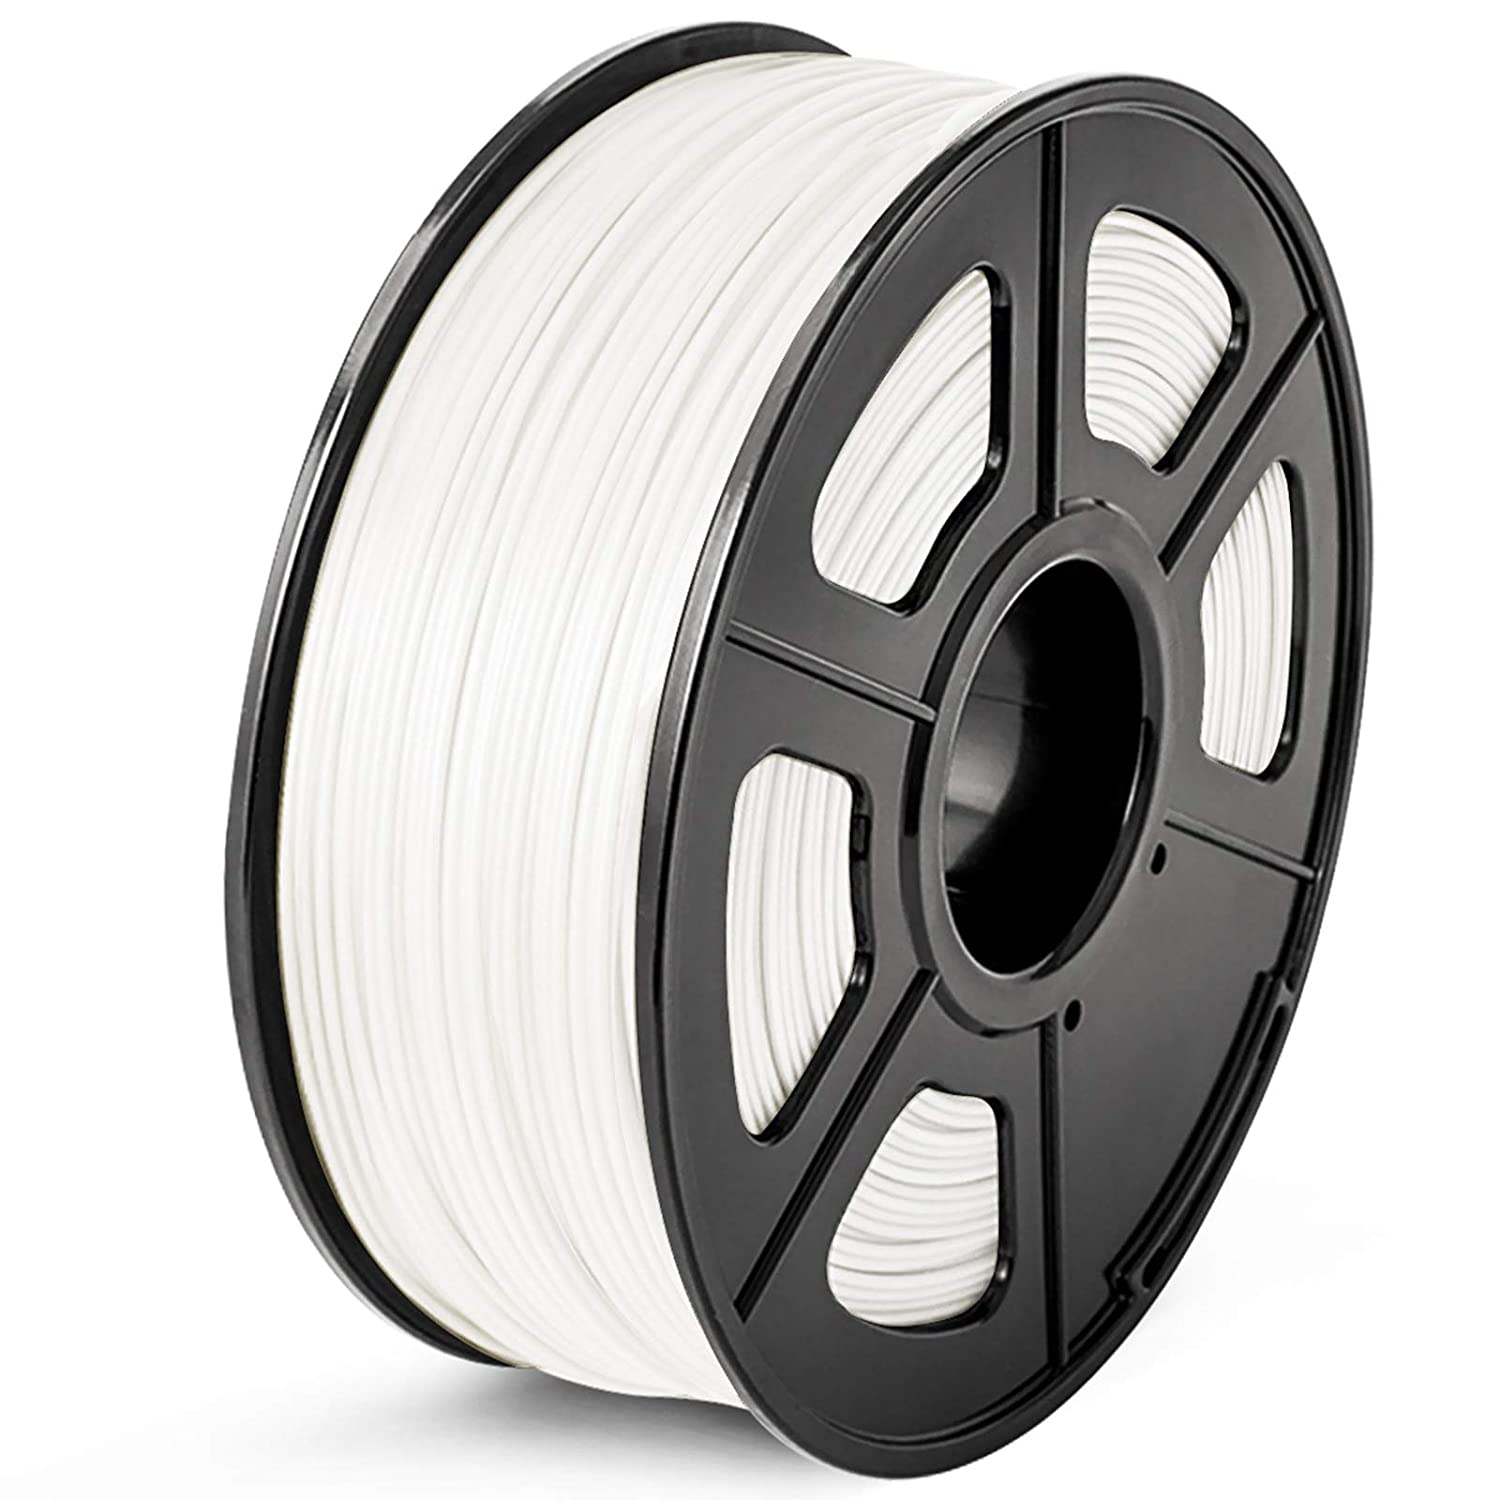 White ABS 3D Printer Filament 1.75mm 1Kg Spool (2.2lbs), Dimensional Accuracy of +/- 0.02mm